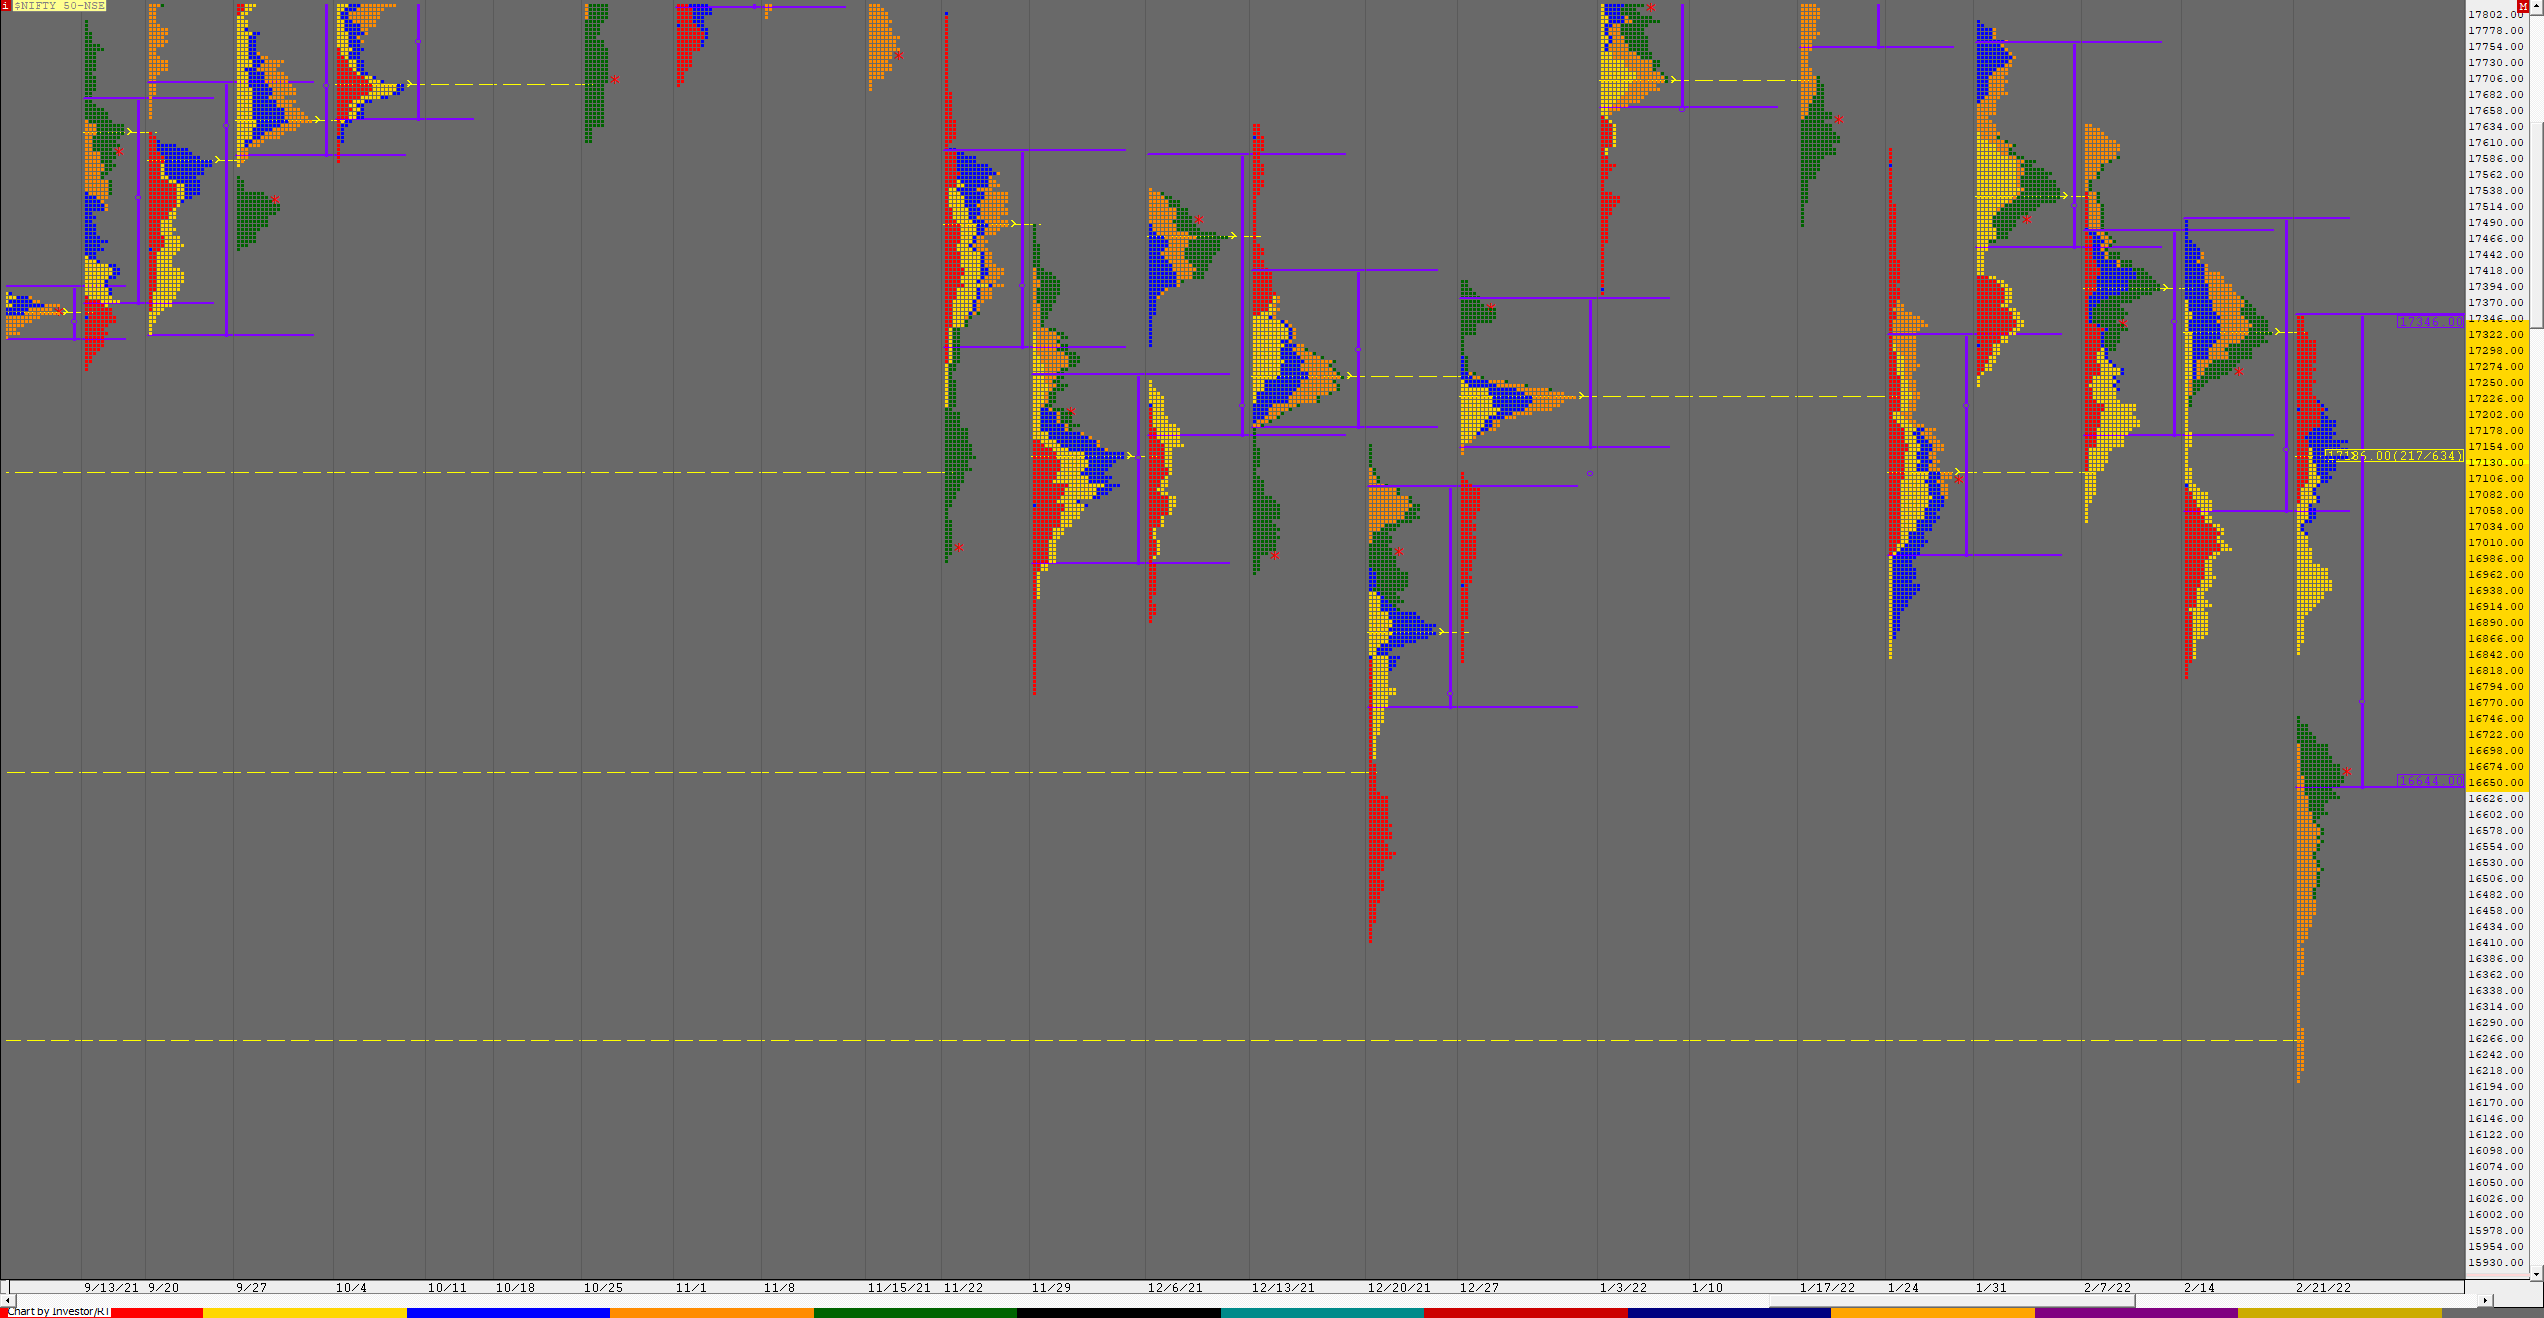 N Weekly 3 Weekly Charts (21St To 25Th Feb 2022) And Market Profile Analysis Banknifty Futures, Charts, Day Trading, Intraday Trading, Intraday Trading Strategies, Market Profile, Market Profile Trading Strategies, Nifty Futures, Order Flow Analysis, Support And Resistance, Technical Analysis, Trading Strategies, Volume Profile Trading